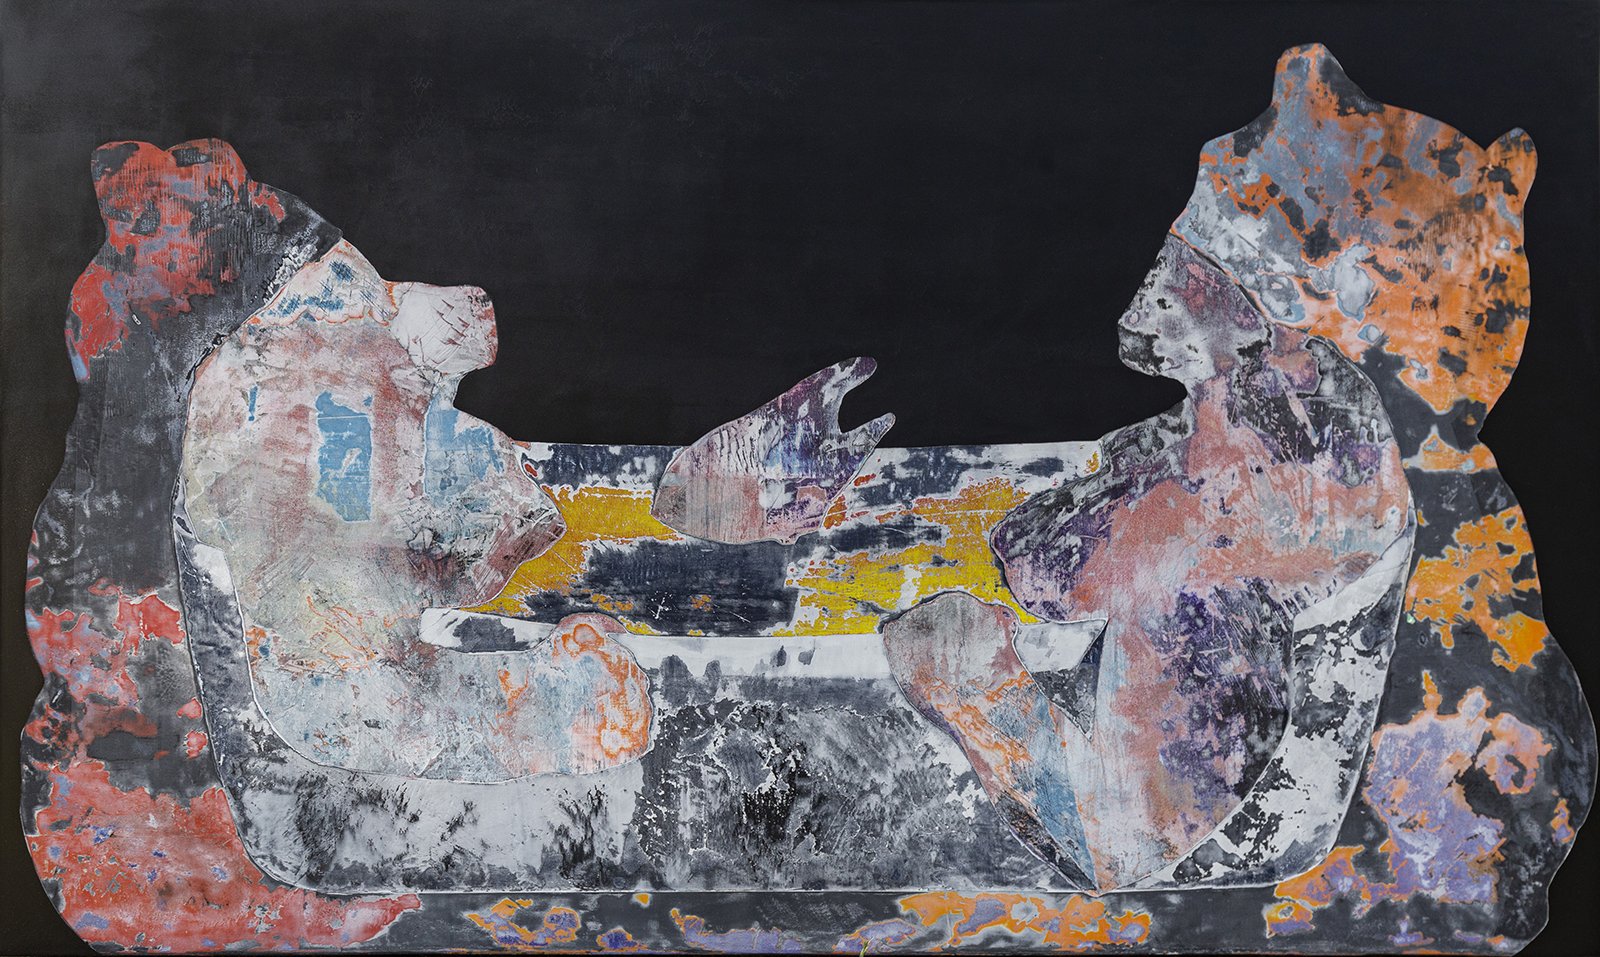  Two Bears in a Bathtub with a Salmon acrylic on canvas 36 x 60 inches 2020 unavailable 